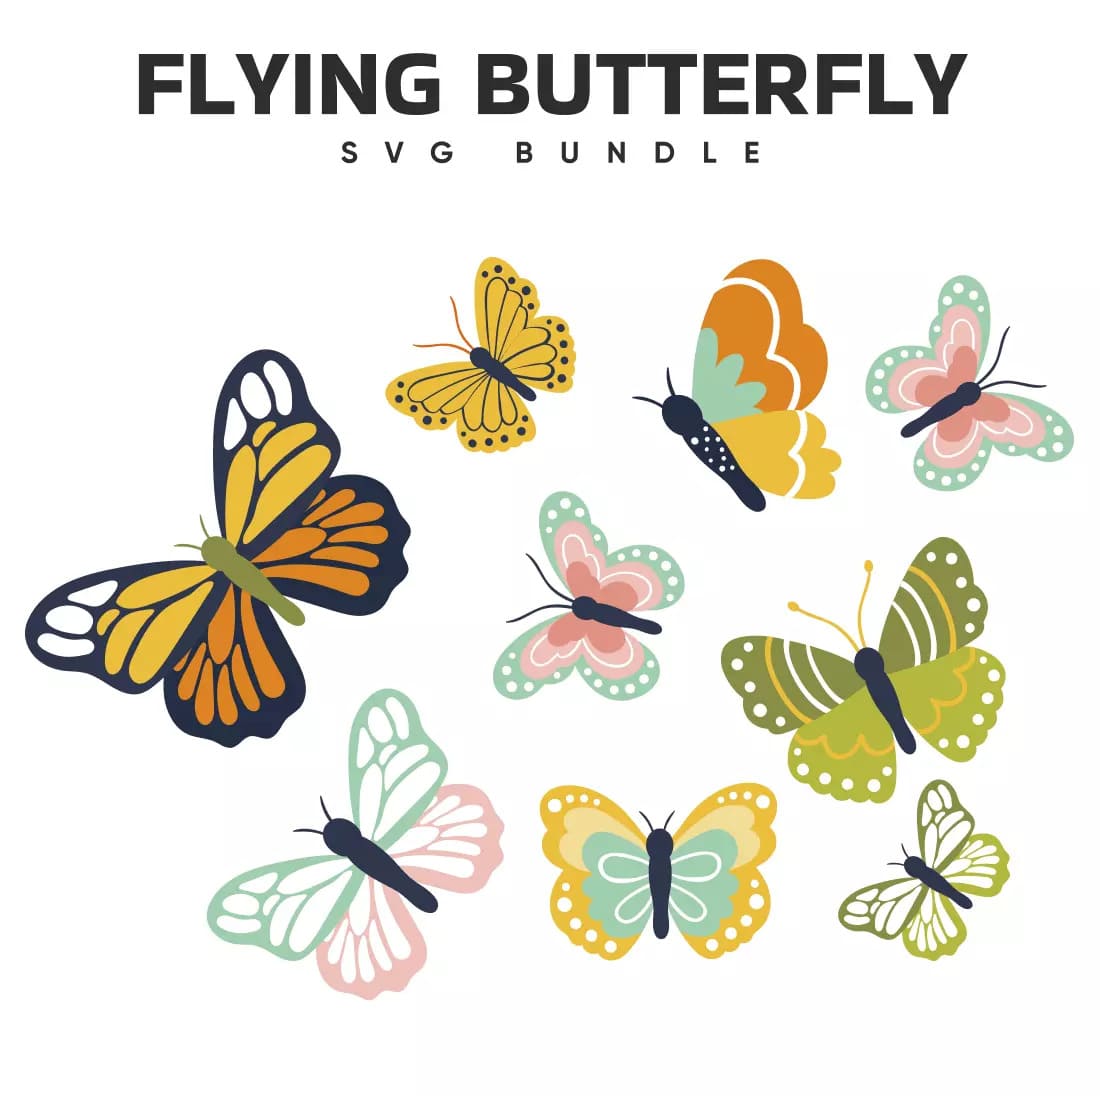 The flying butterfly svg bundle.